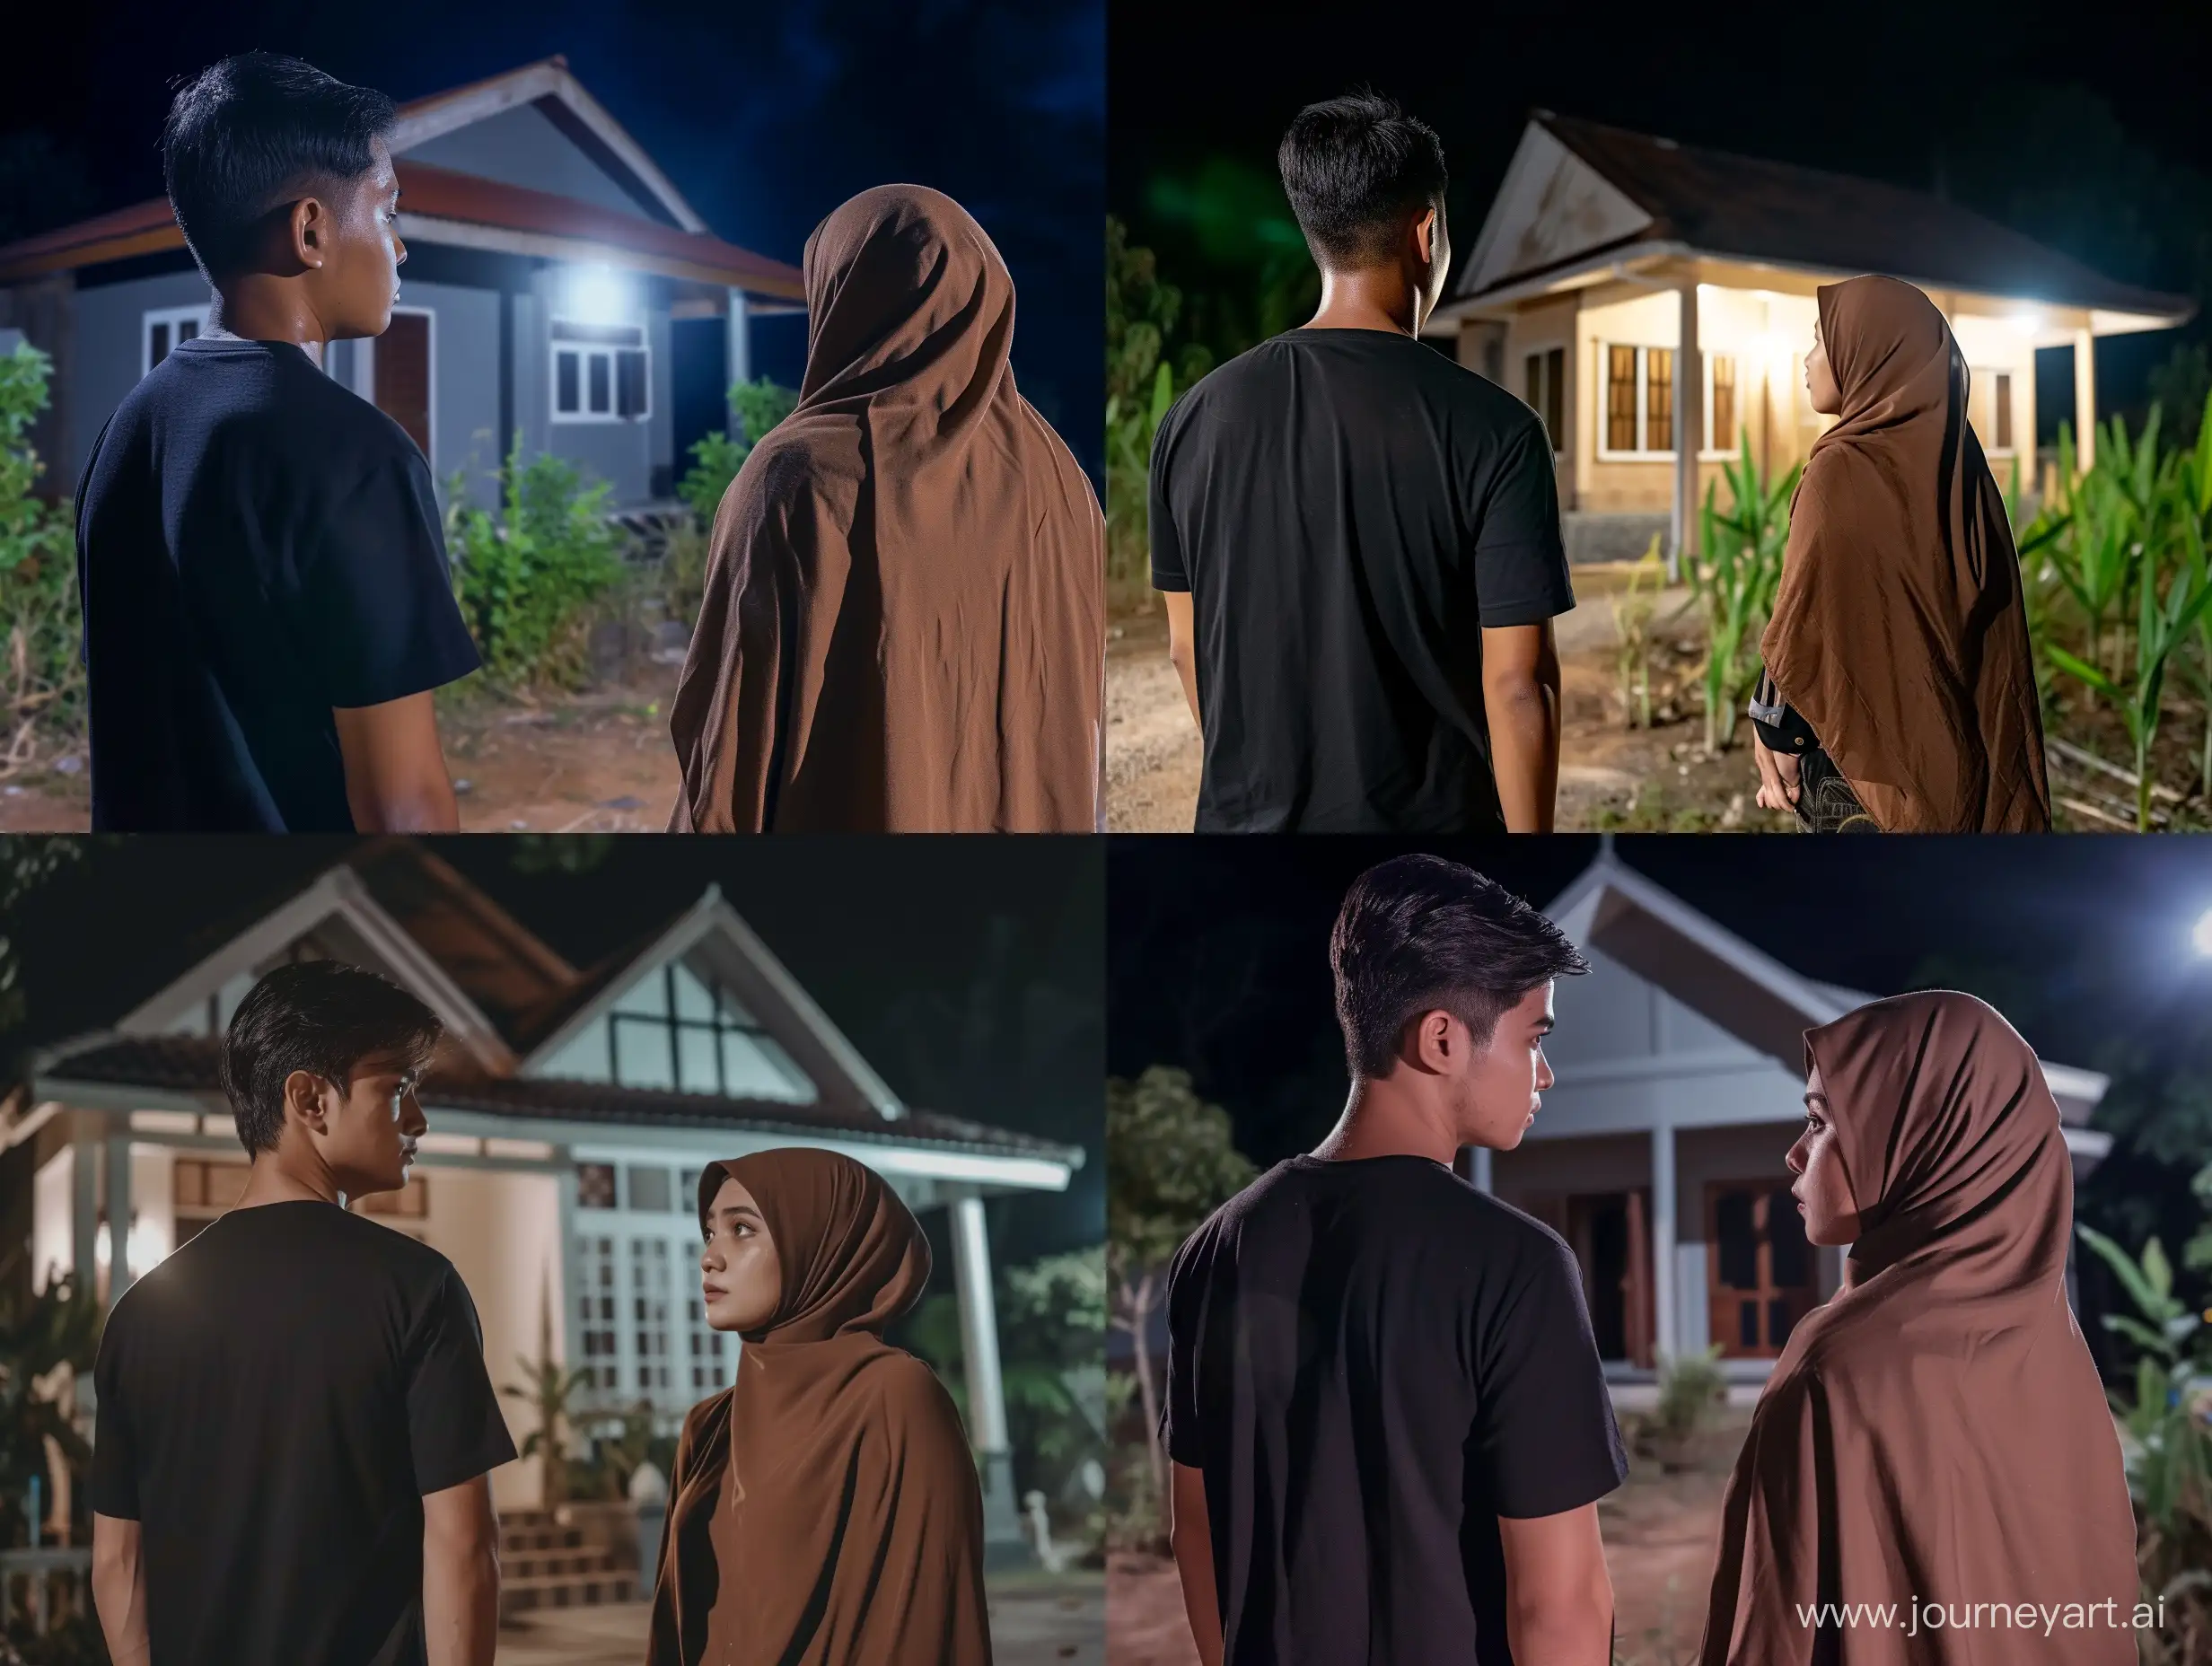 A 30 year old young man wearing a black t-shirt and a 29 year old Indonesian woman wearing a brown hijab looking at a simple house at night,  Front view,  horror movie scene